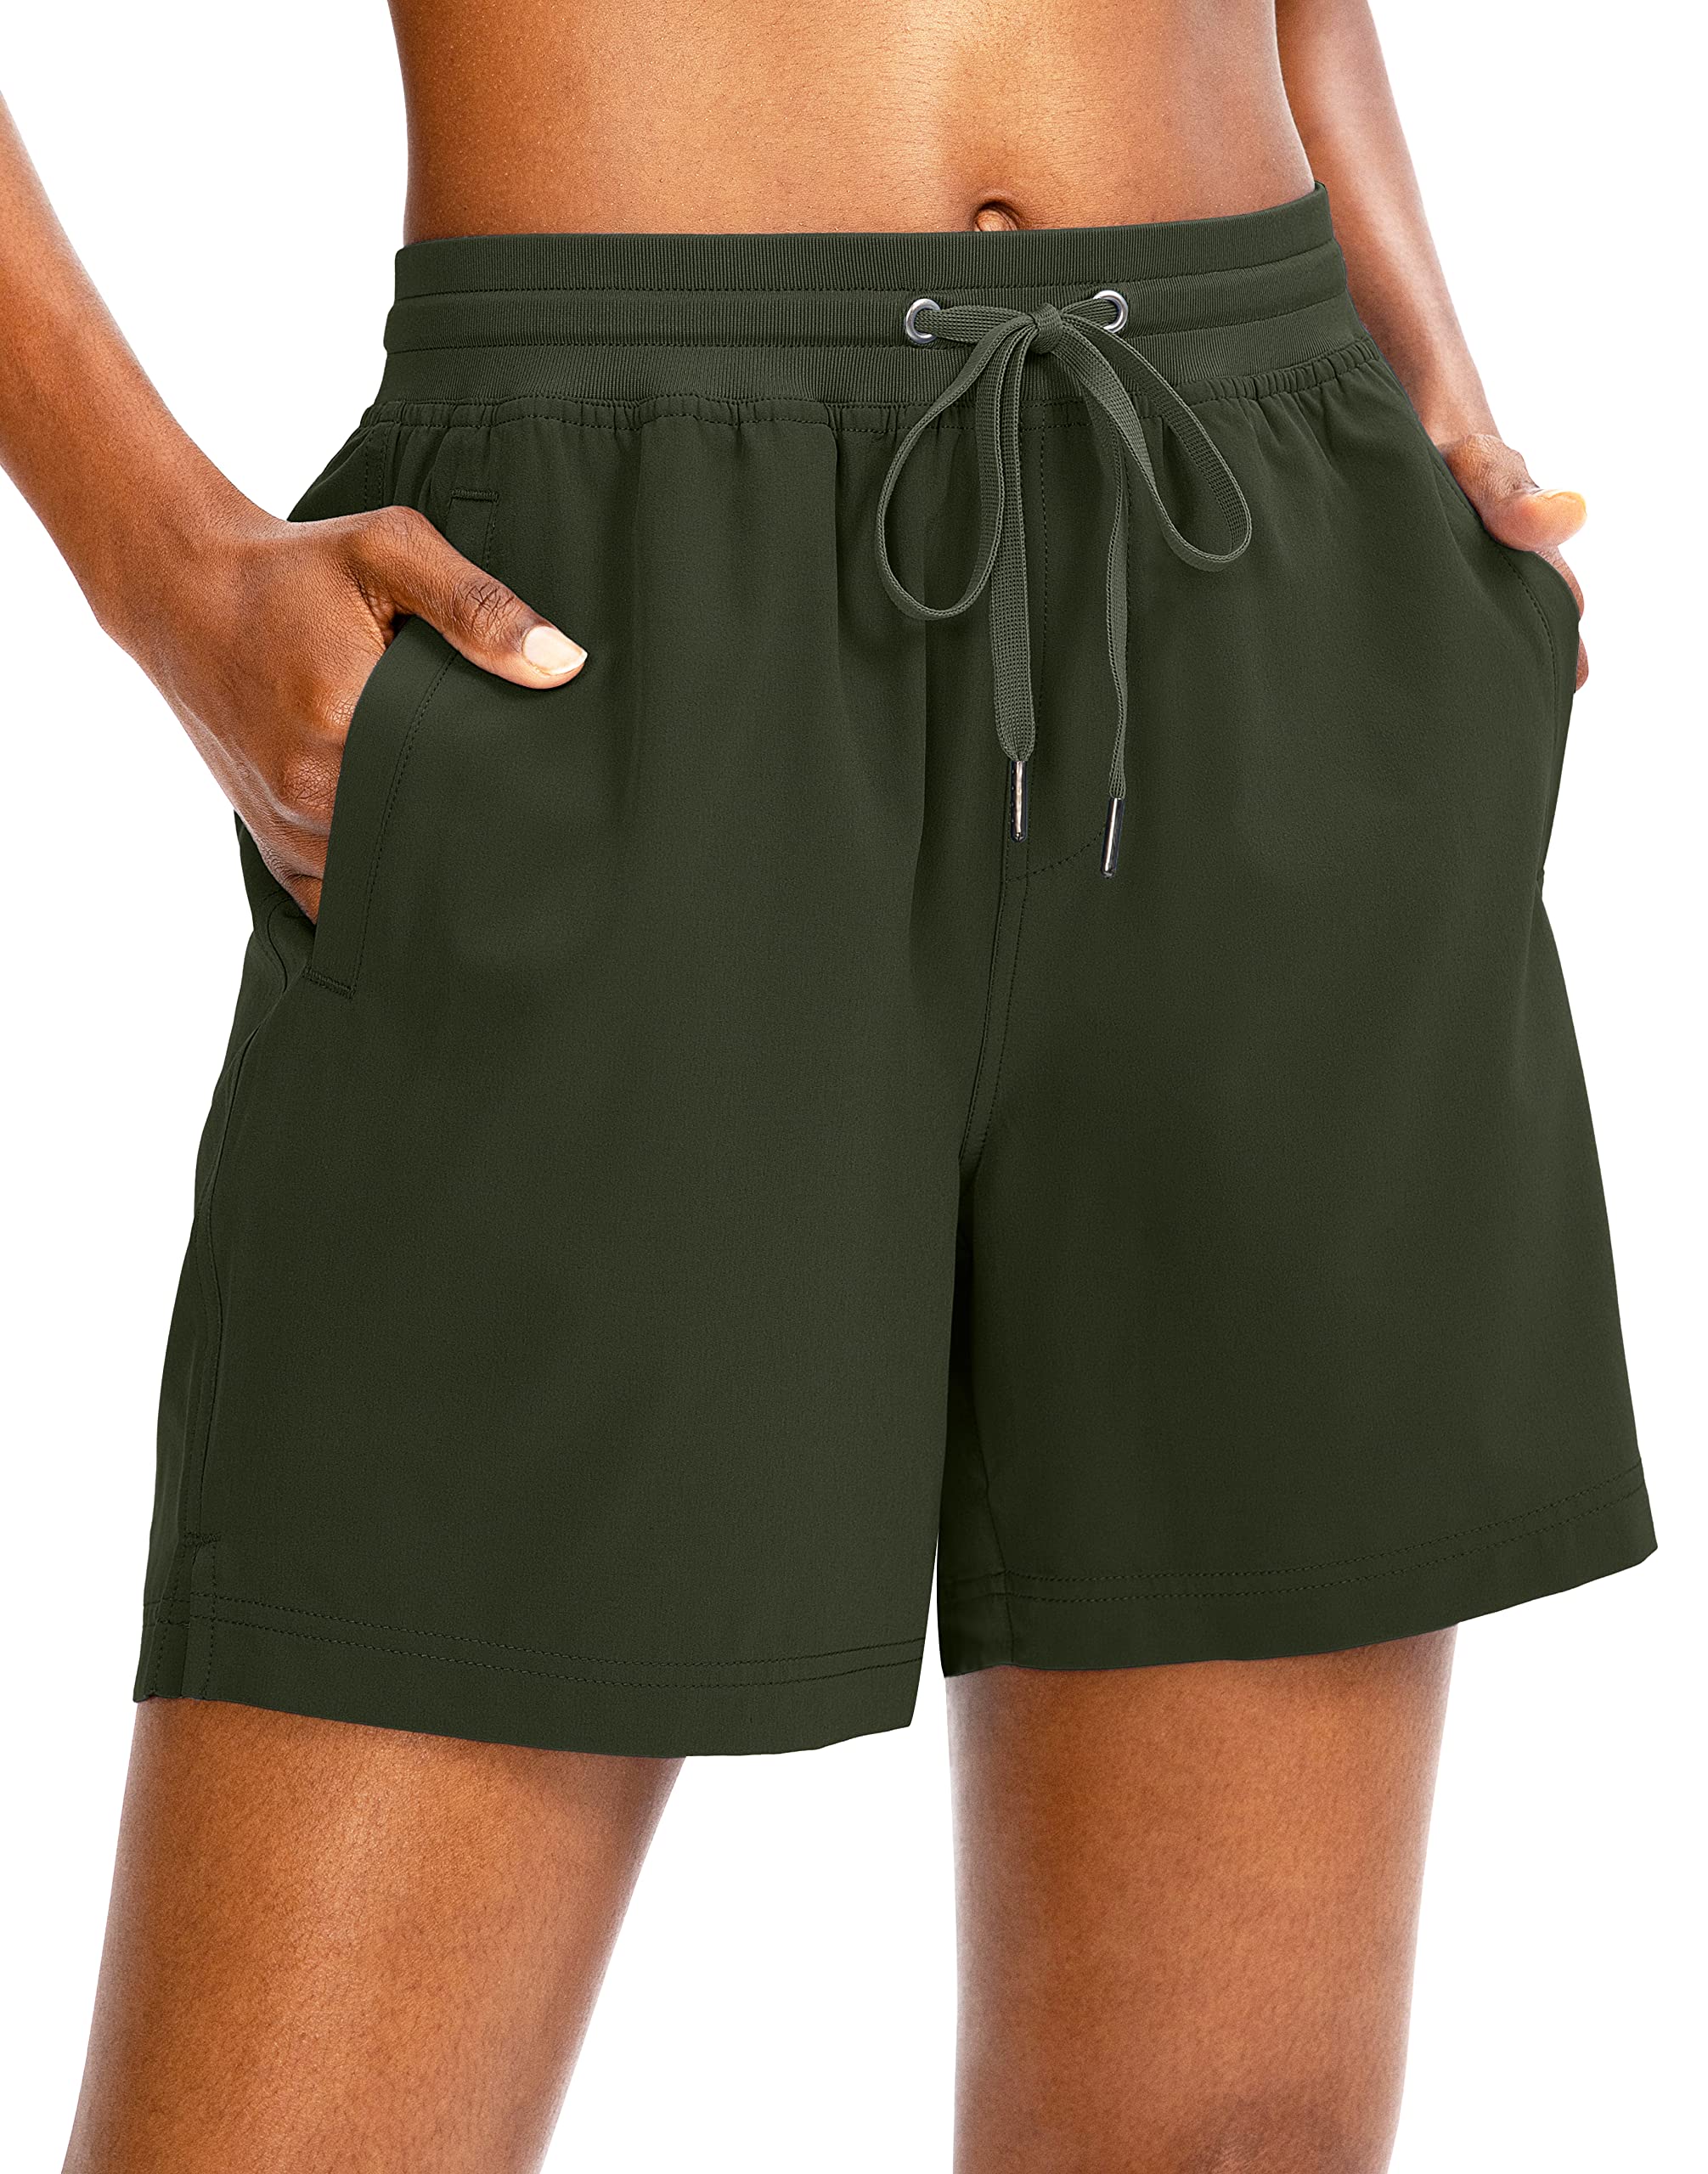 Yyv Womens 5 Hiking Golf Shorts Quick Dry Athletic Shorts For Summer Outdoor Casual With Pockets(Army Green Small)